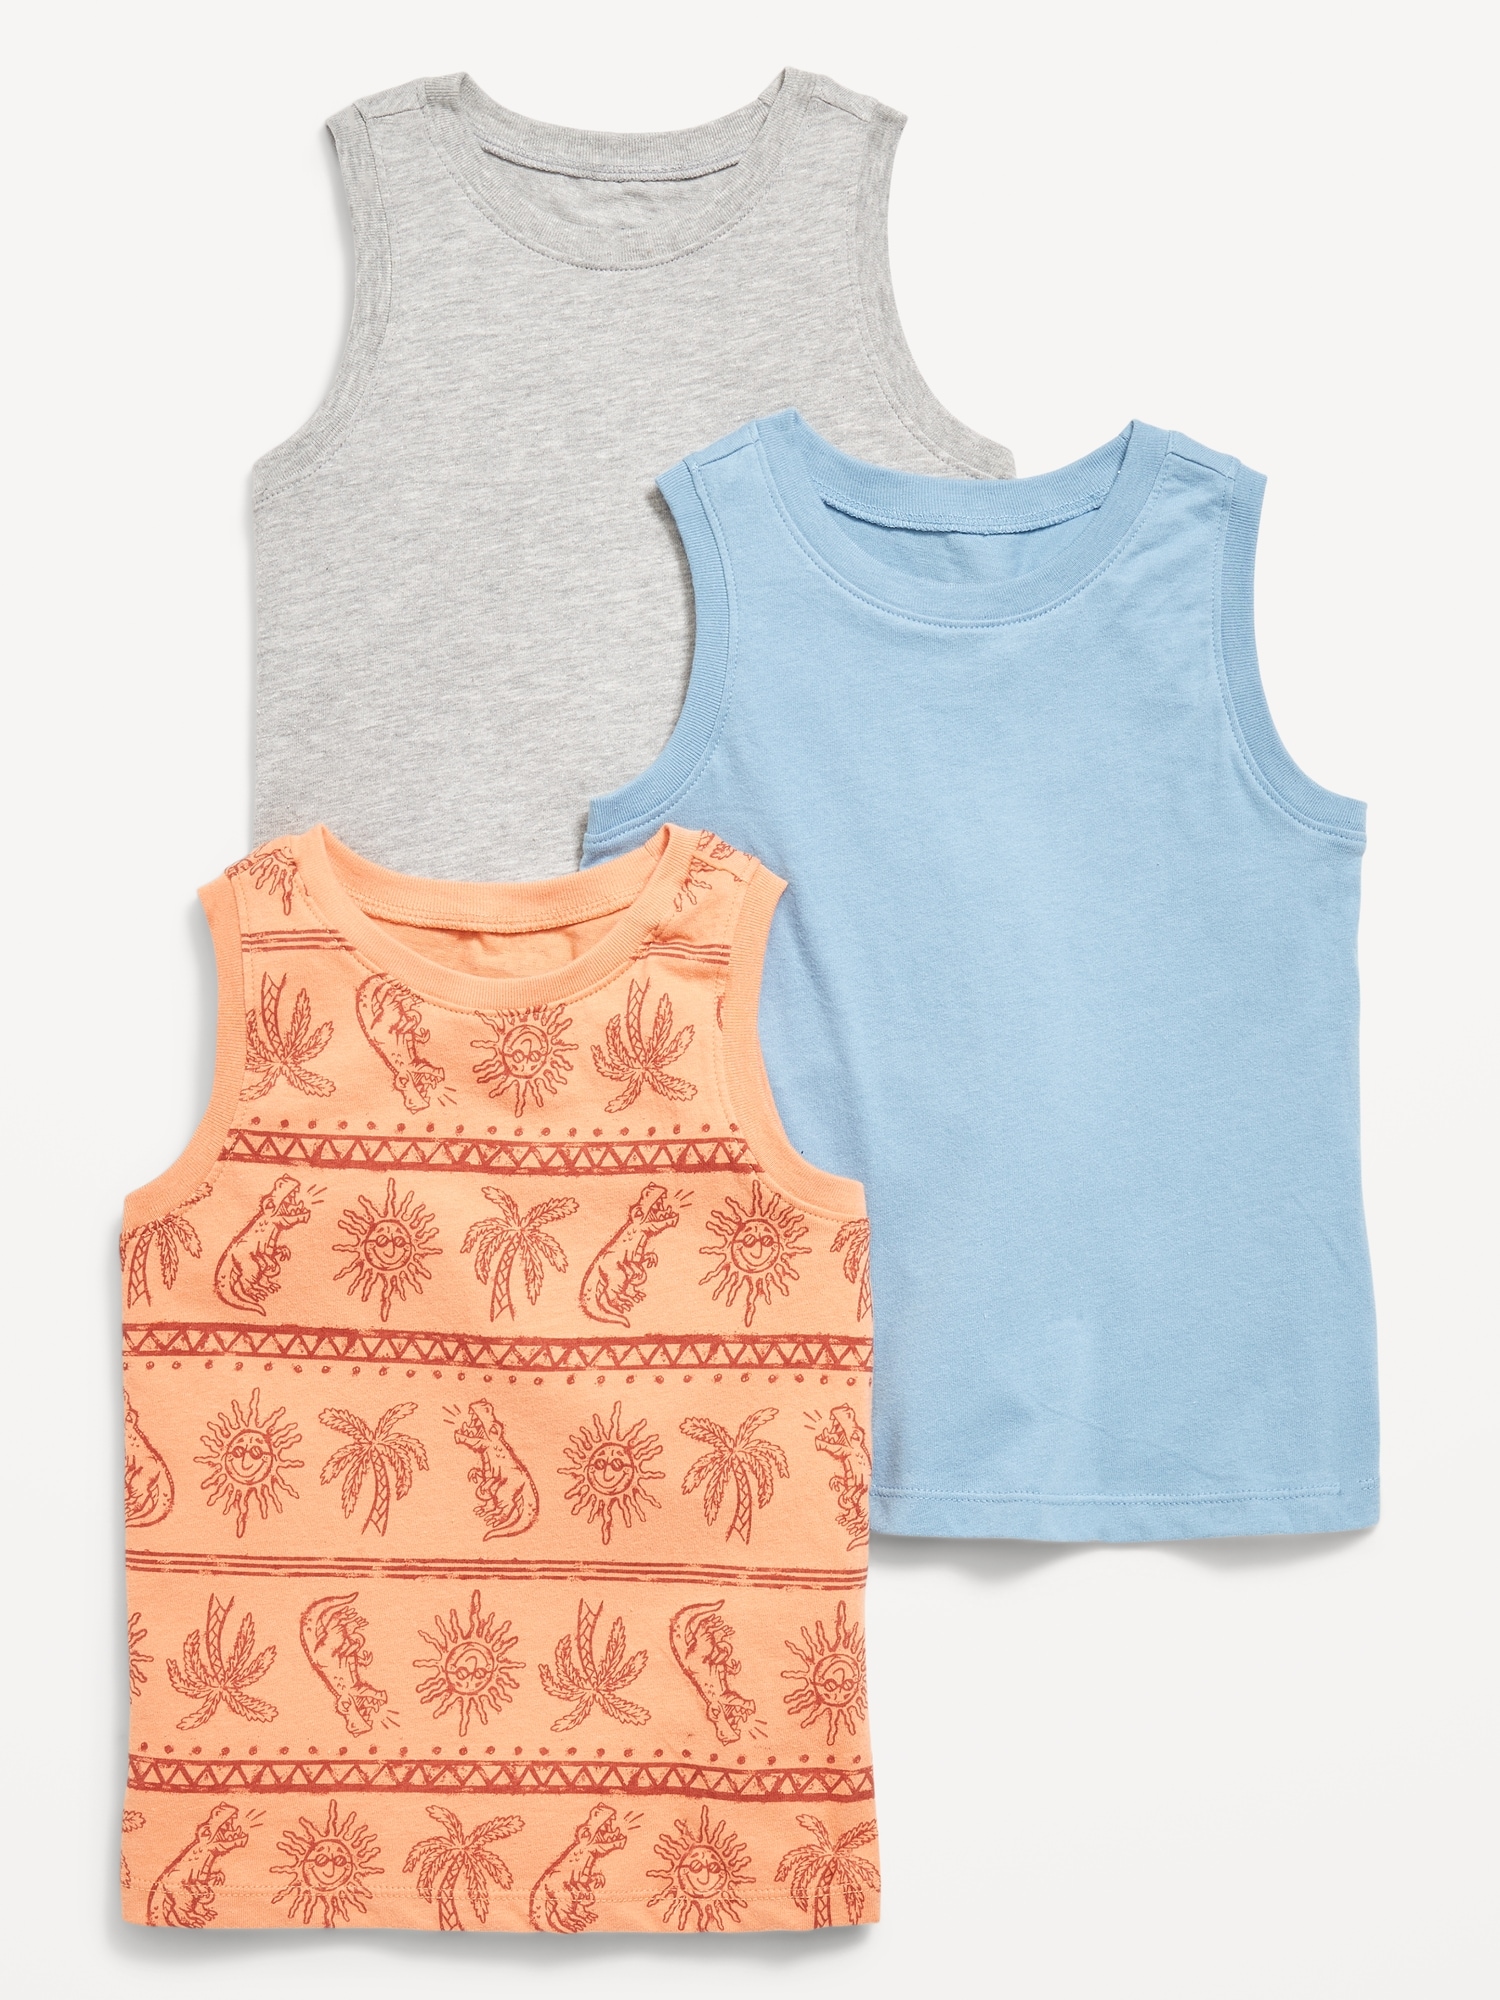 Tank Top 3-Pack for Toddler Boys Hot Deal